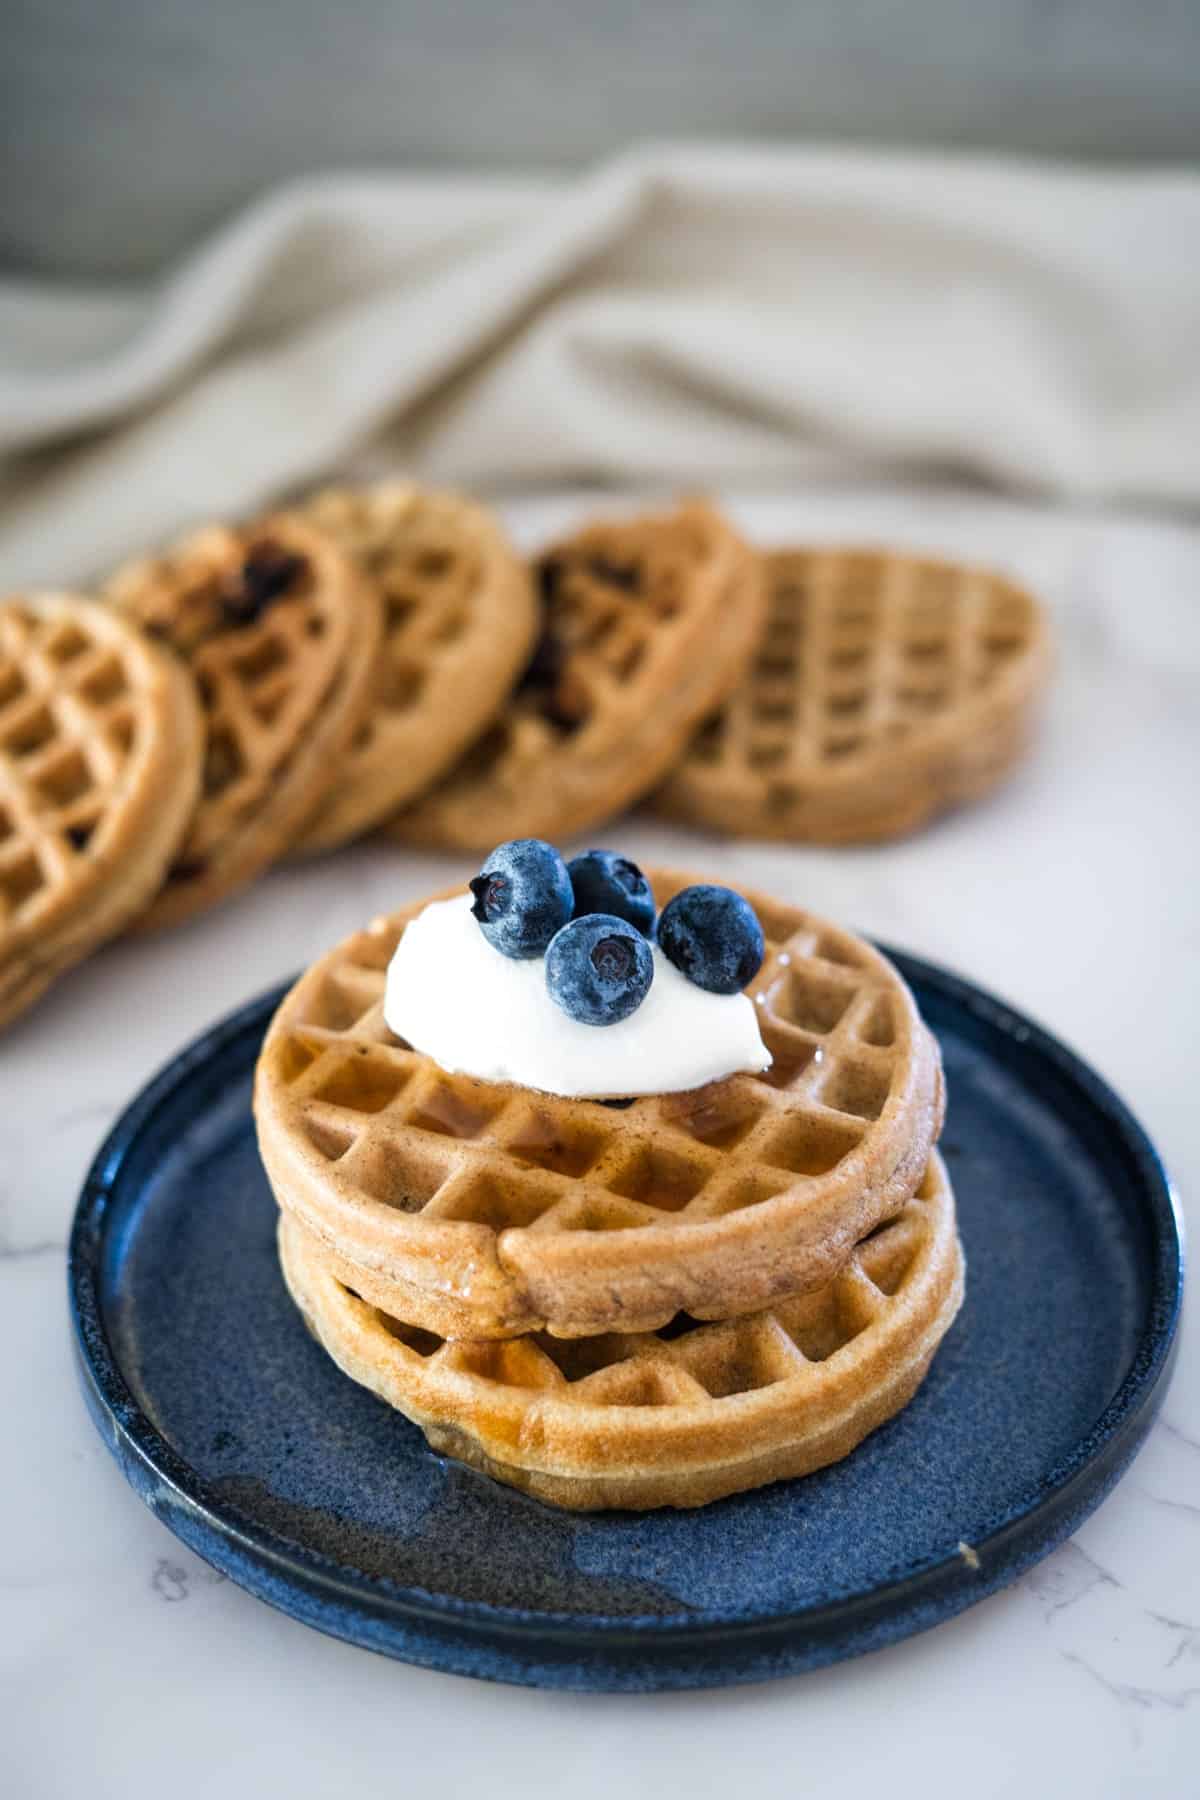 Peanut butter waffles with blueberries and whipped cream on a plate.